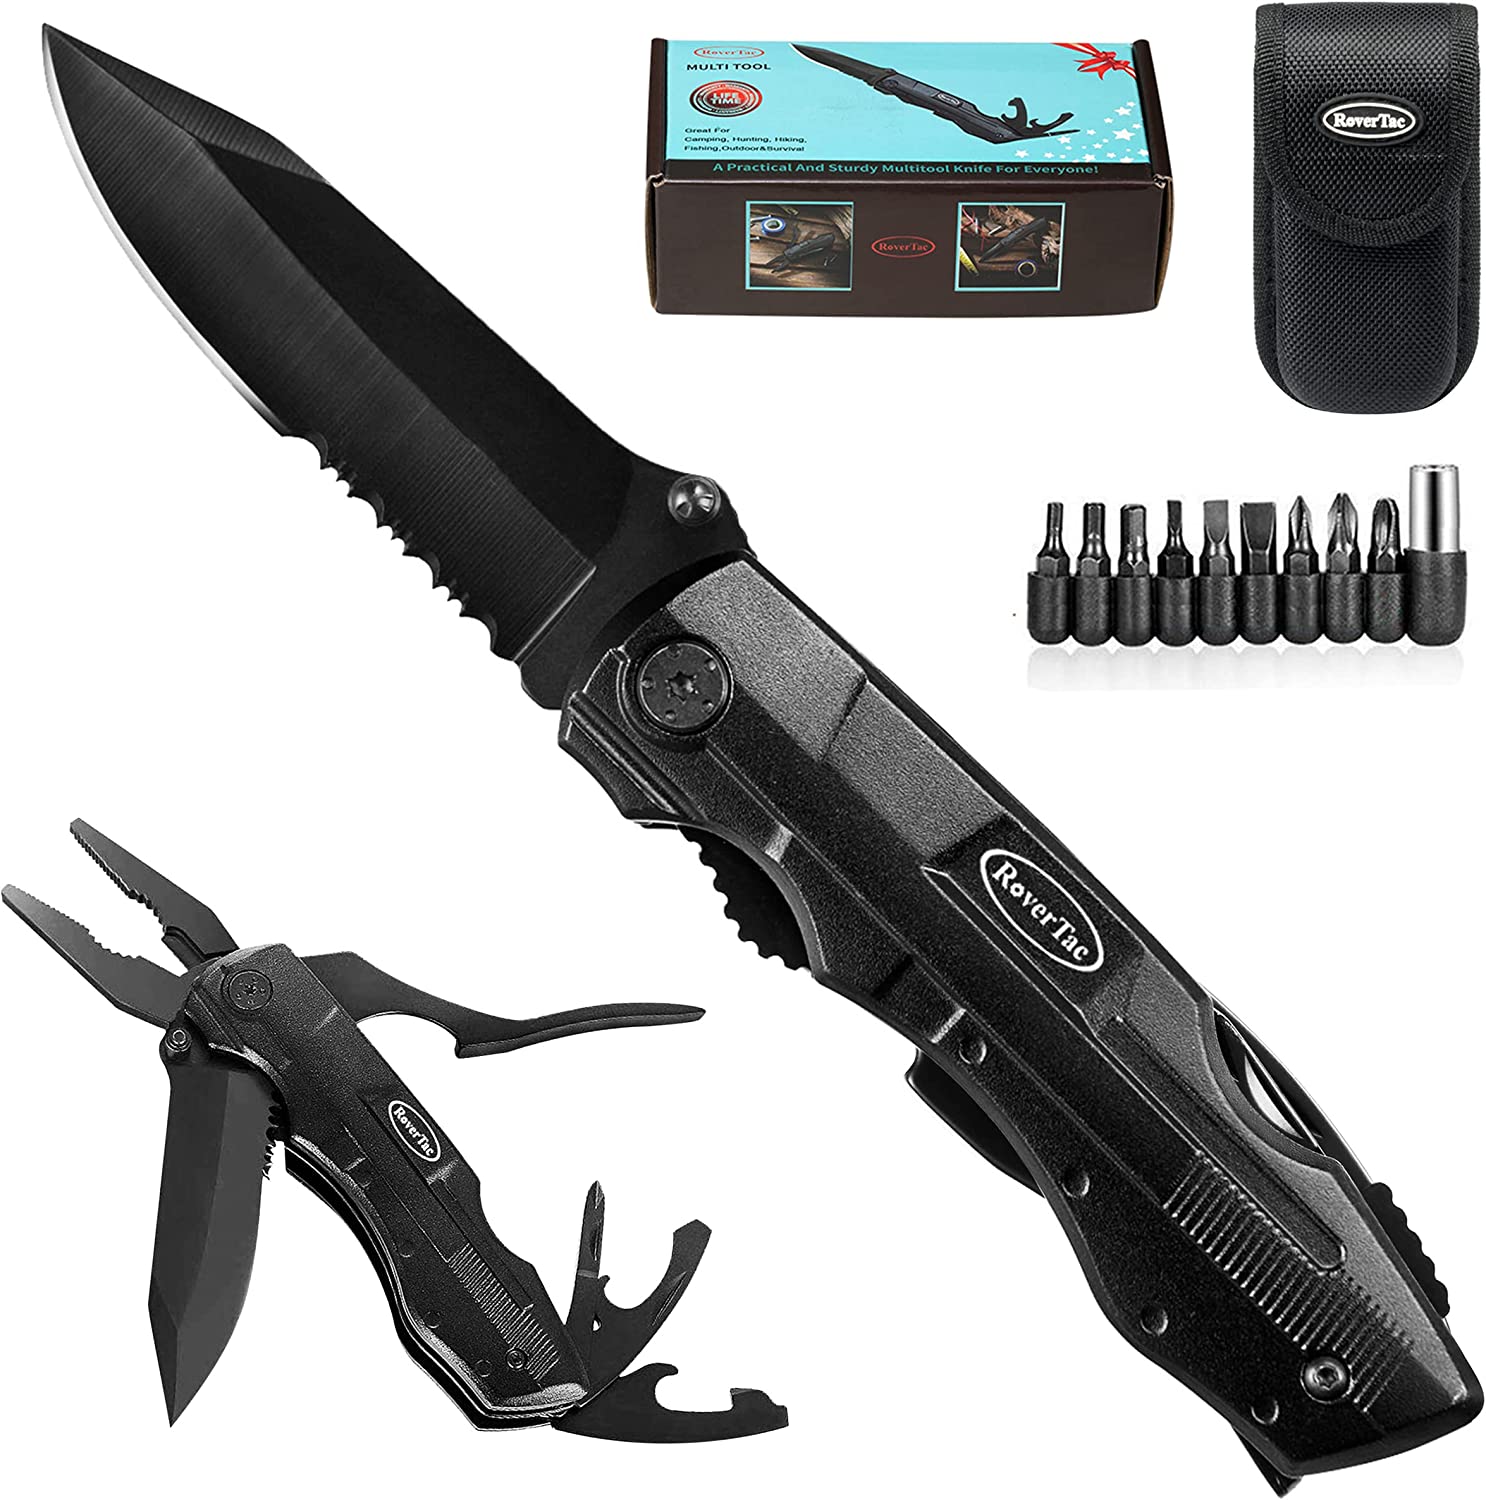 RoverTac Pocket Knife Tactical Folding Multi Tool Knife with